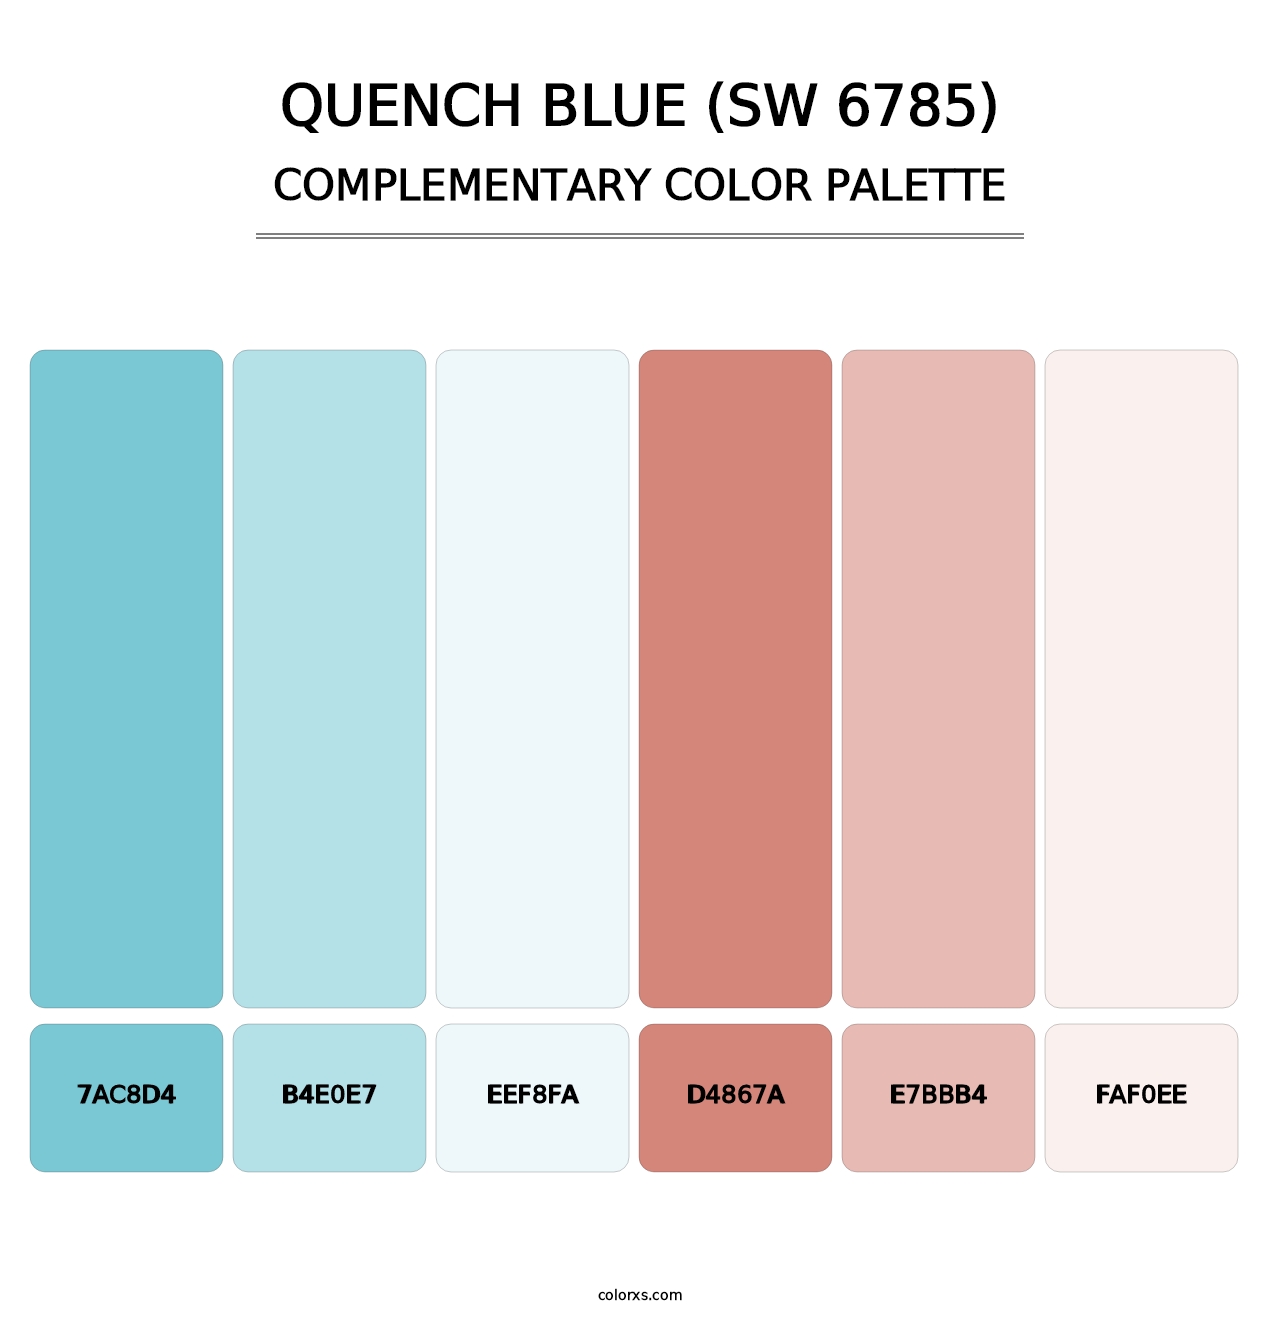 Quench Blue (SW 6785) - Complementary Color Palette